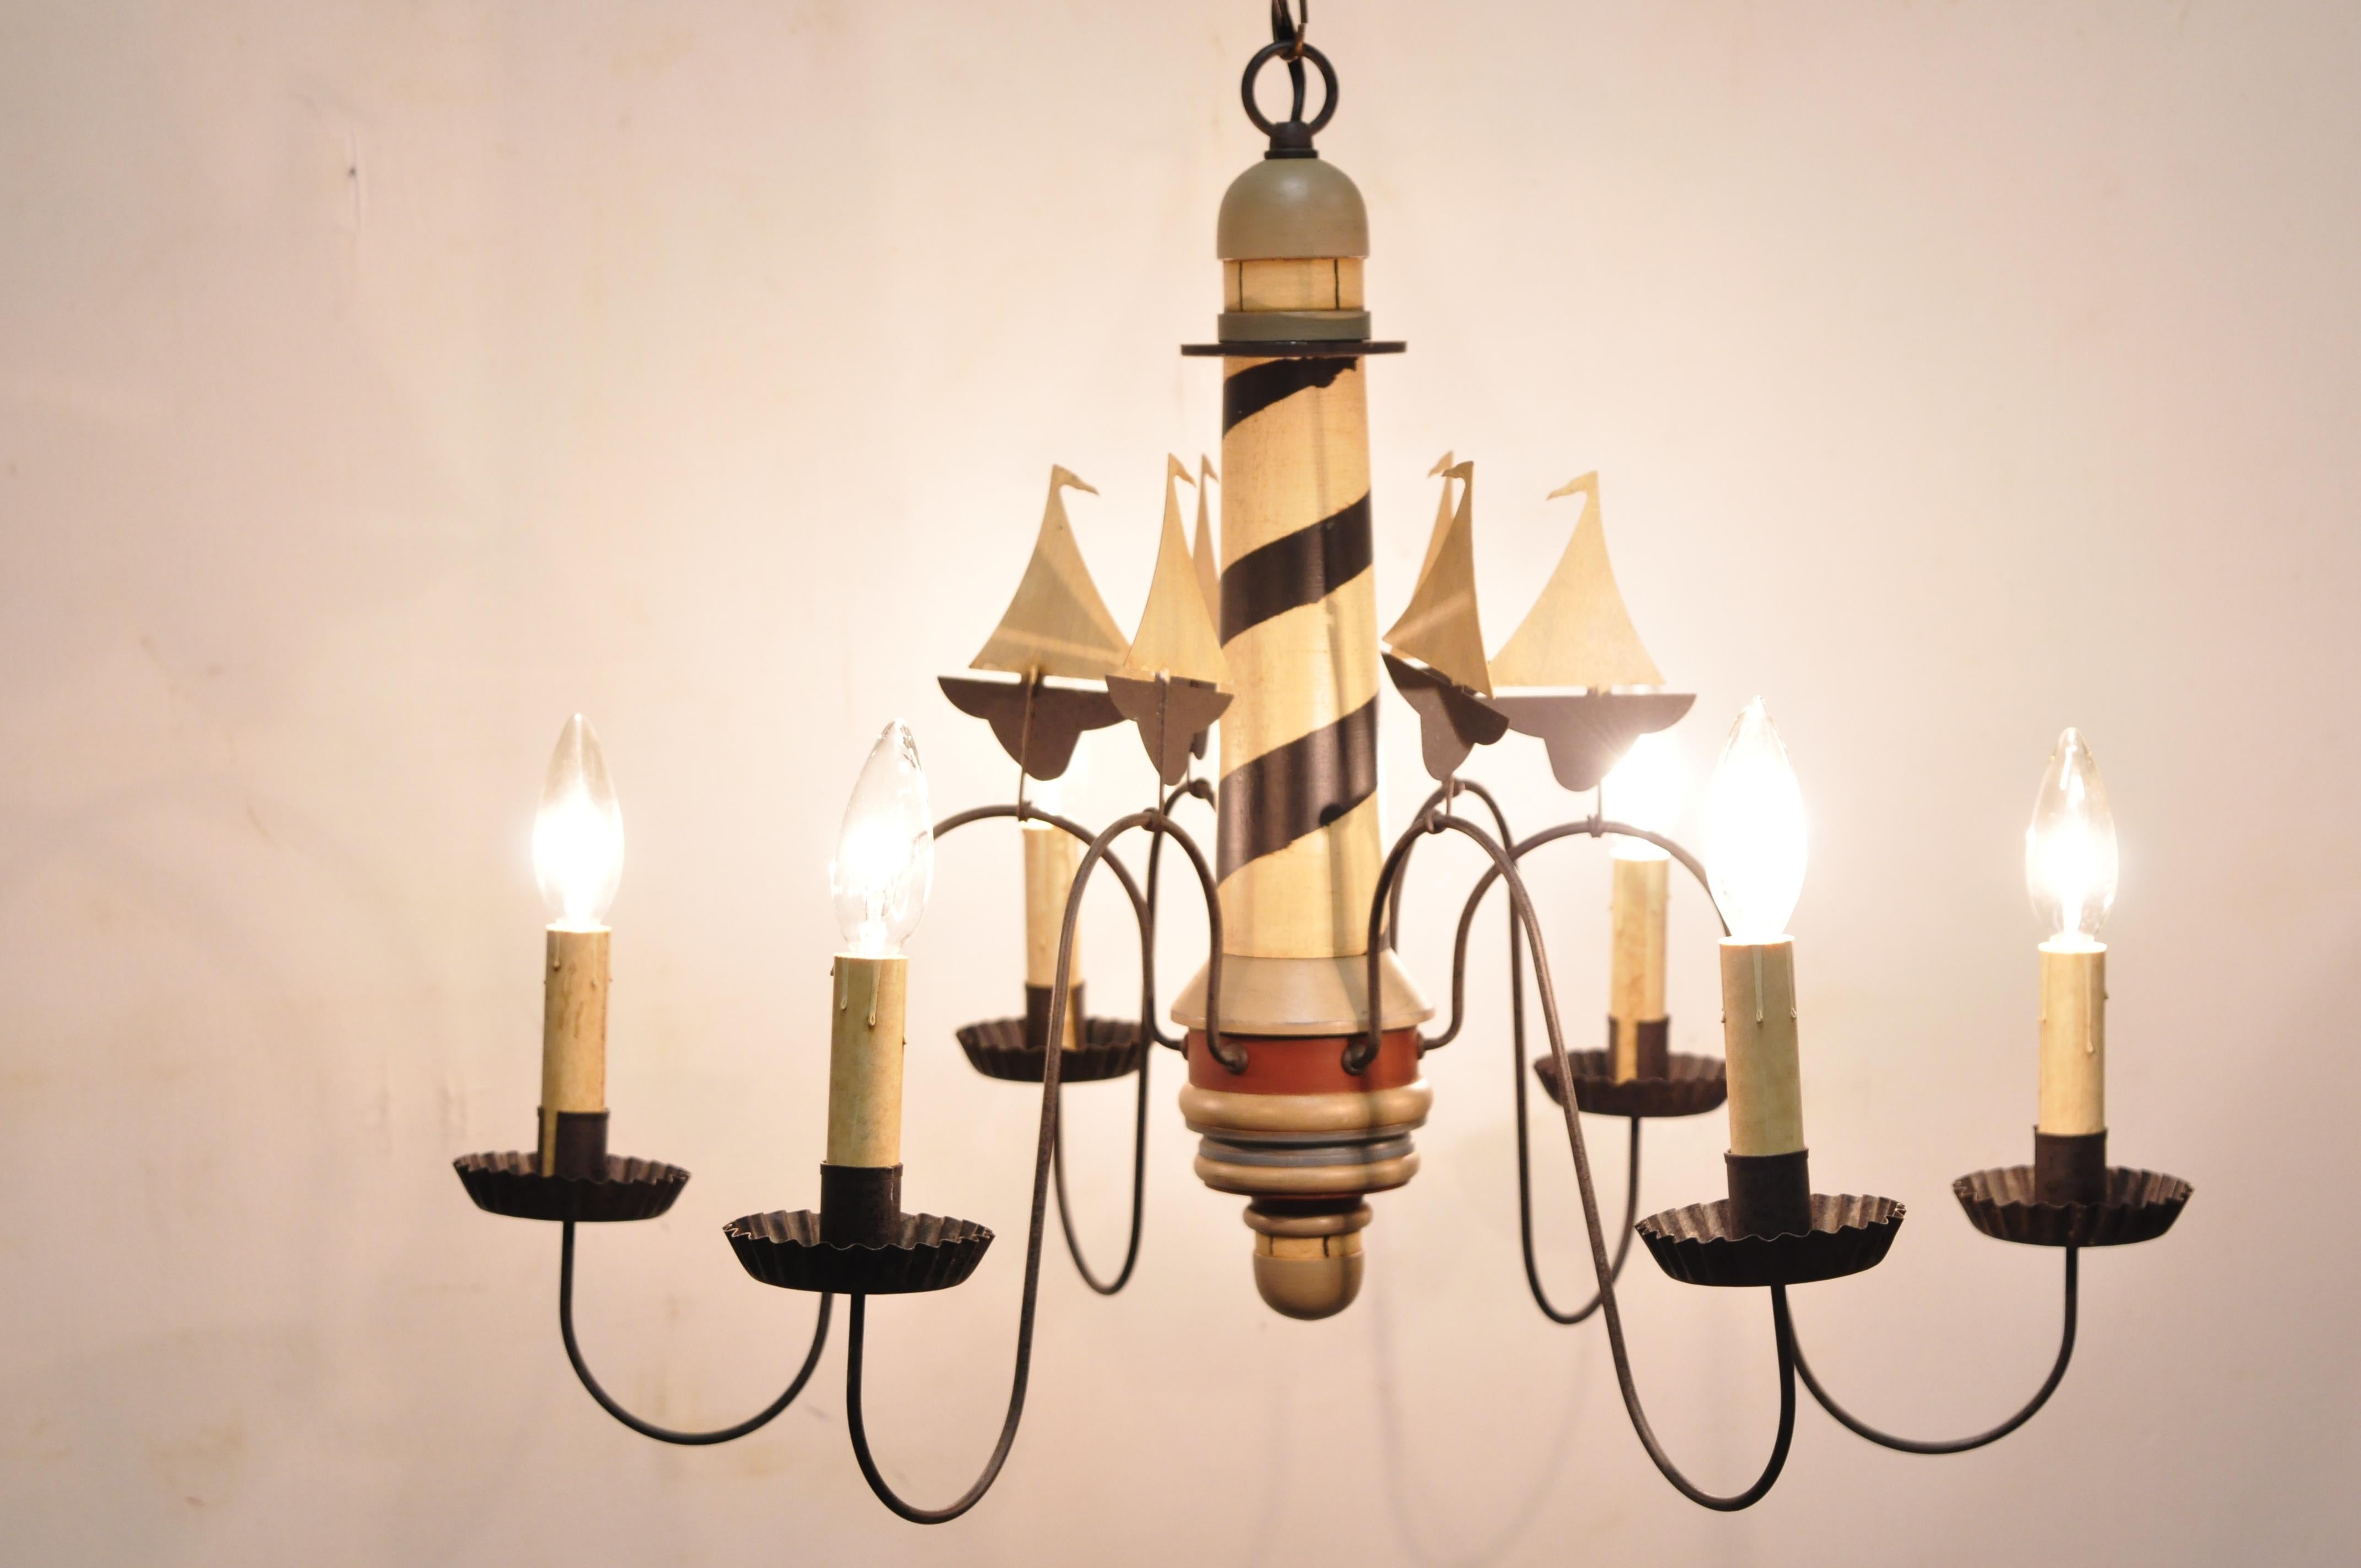 Nautical lighthouse and boat ship wood and metal chandelier light fixture. Item features iron arms, metal boat/ship accents, wooden lighthouse, great style and form, circa late 20th century. Measurements: 18